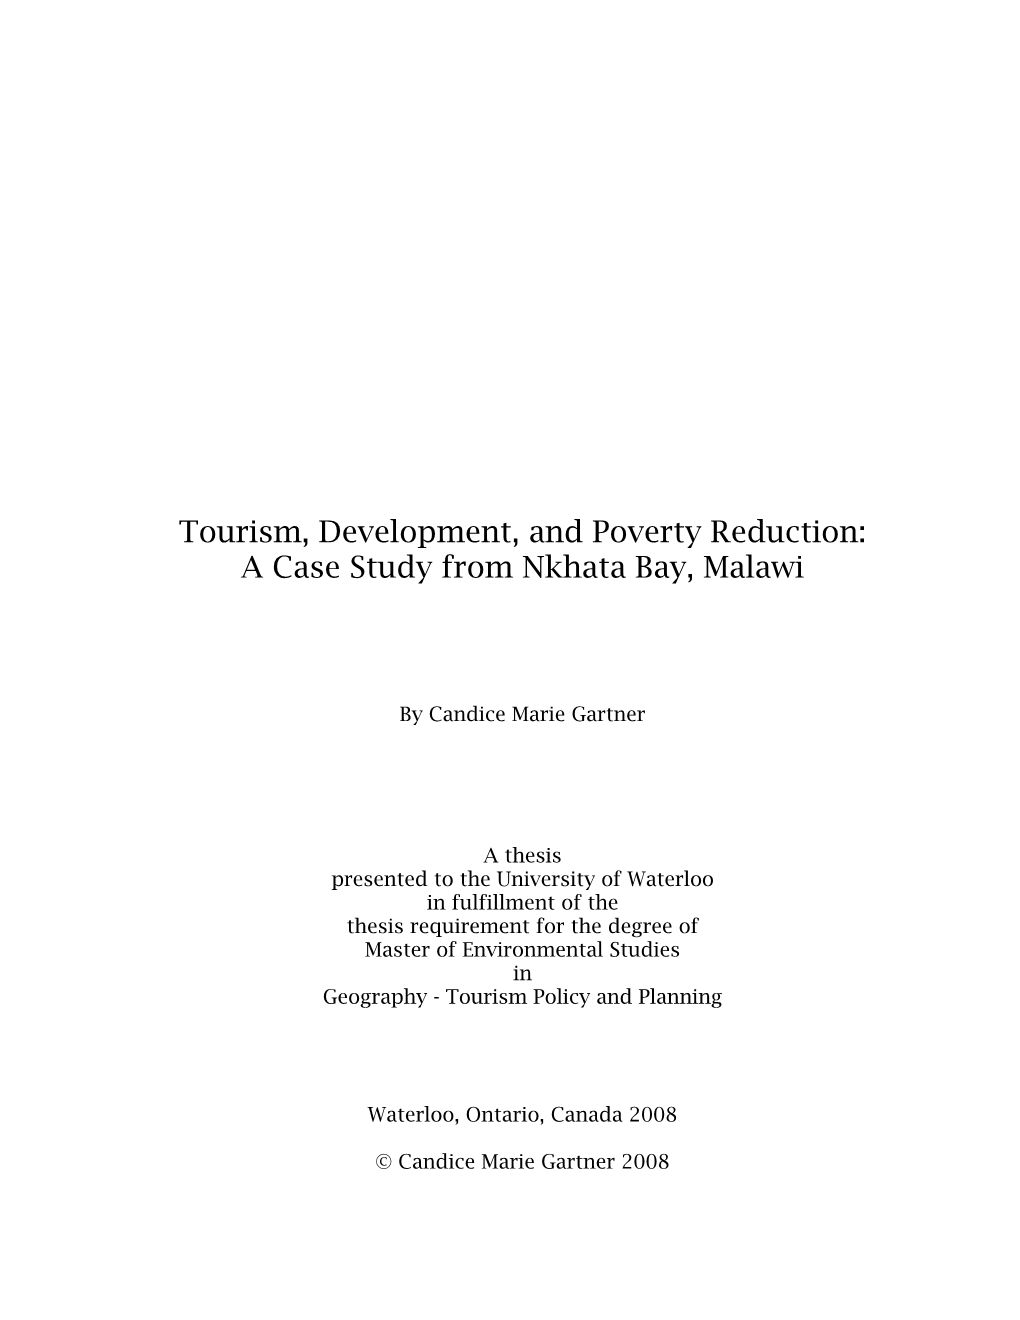 Tourism, Development, and Poverty Reduction: a Case Study from Nkhata Bay, Malawi